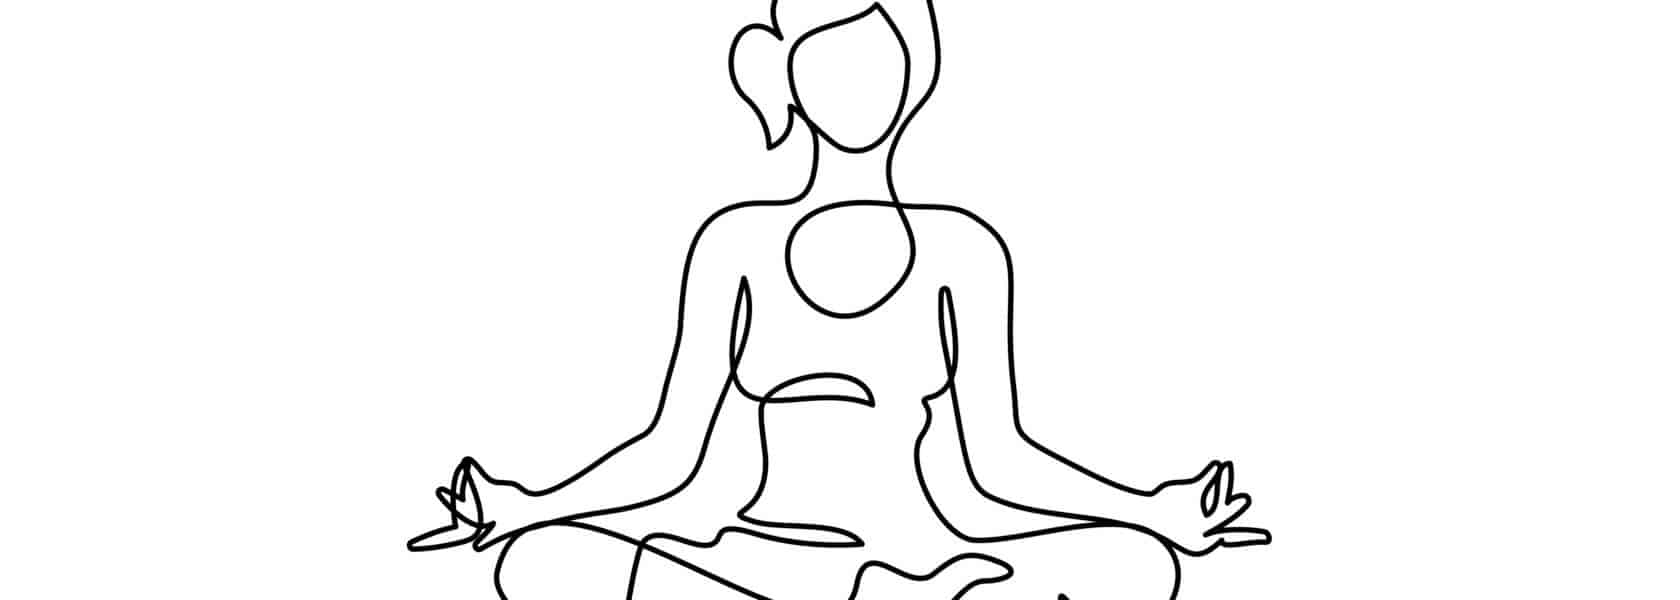 A Guided Meditation Technique towards Body Acceptance